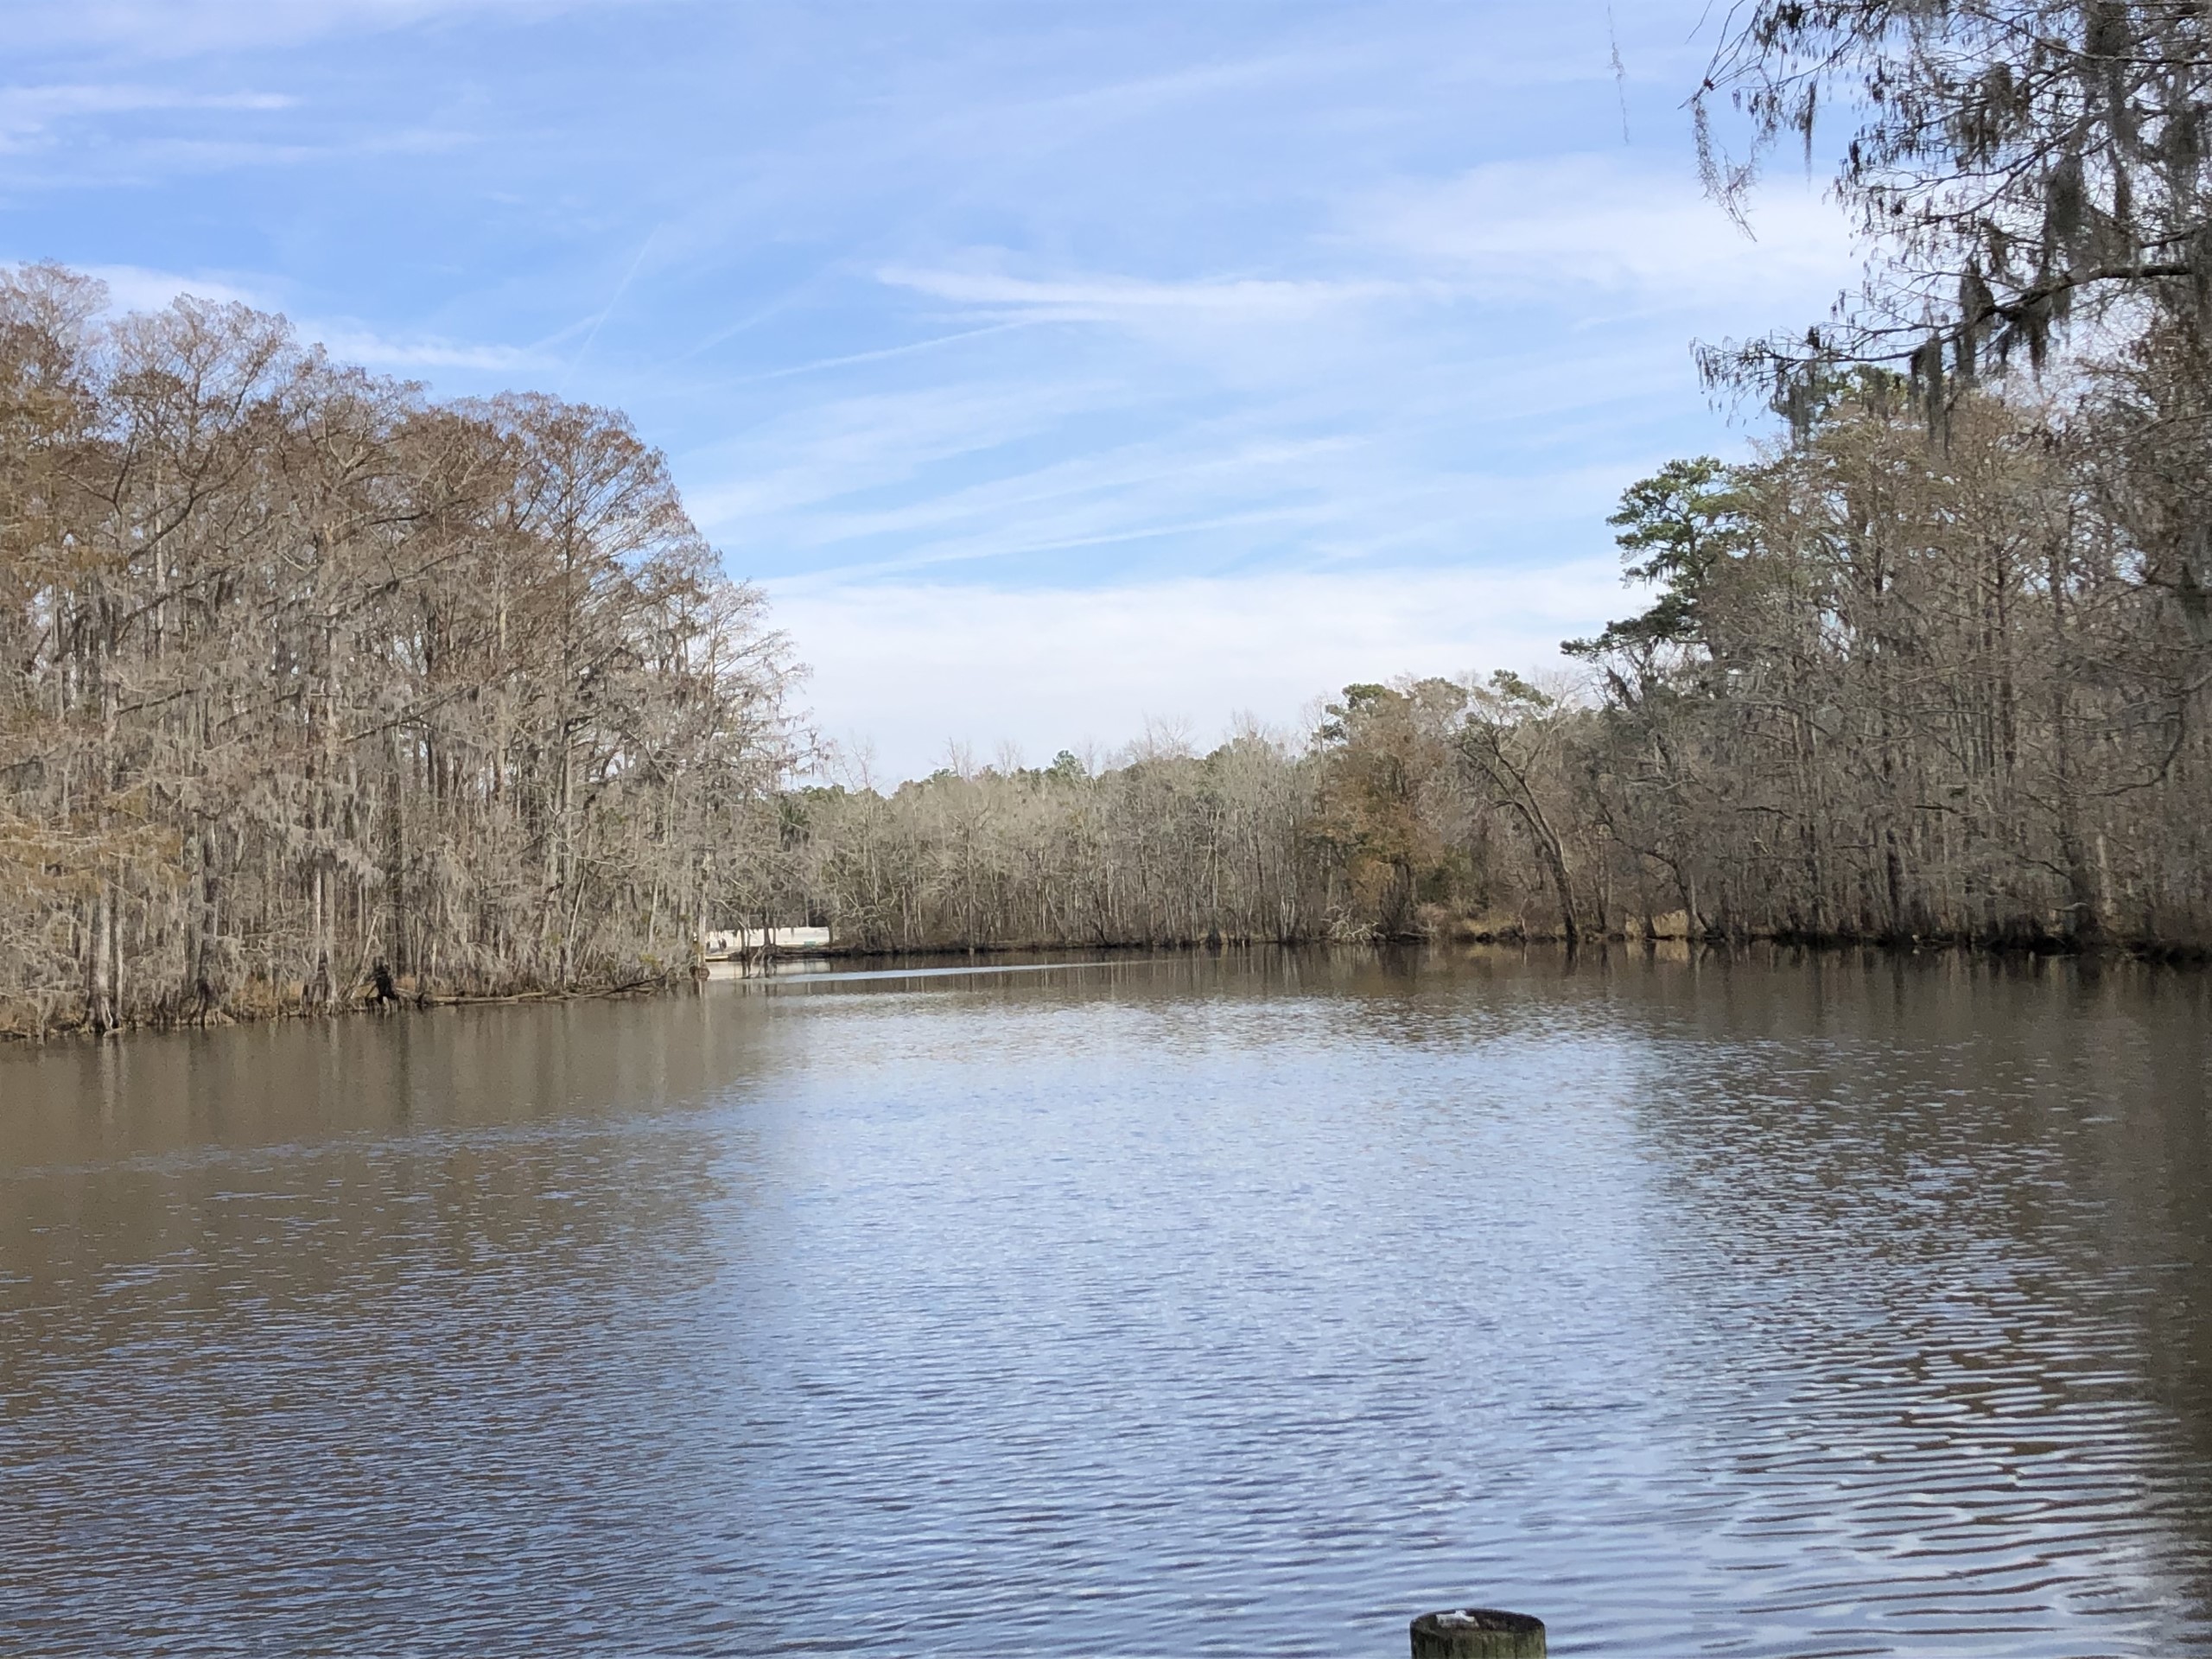 Image of Swift Creek, with a blue sky and some clouds above it, and woods on both sides of the creek.